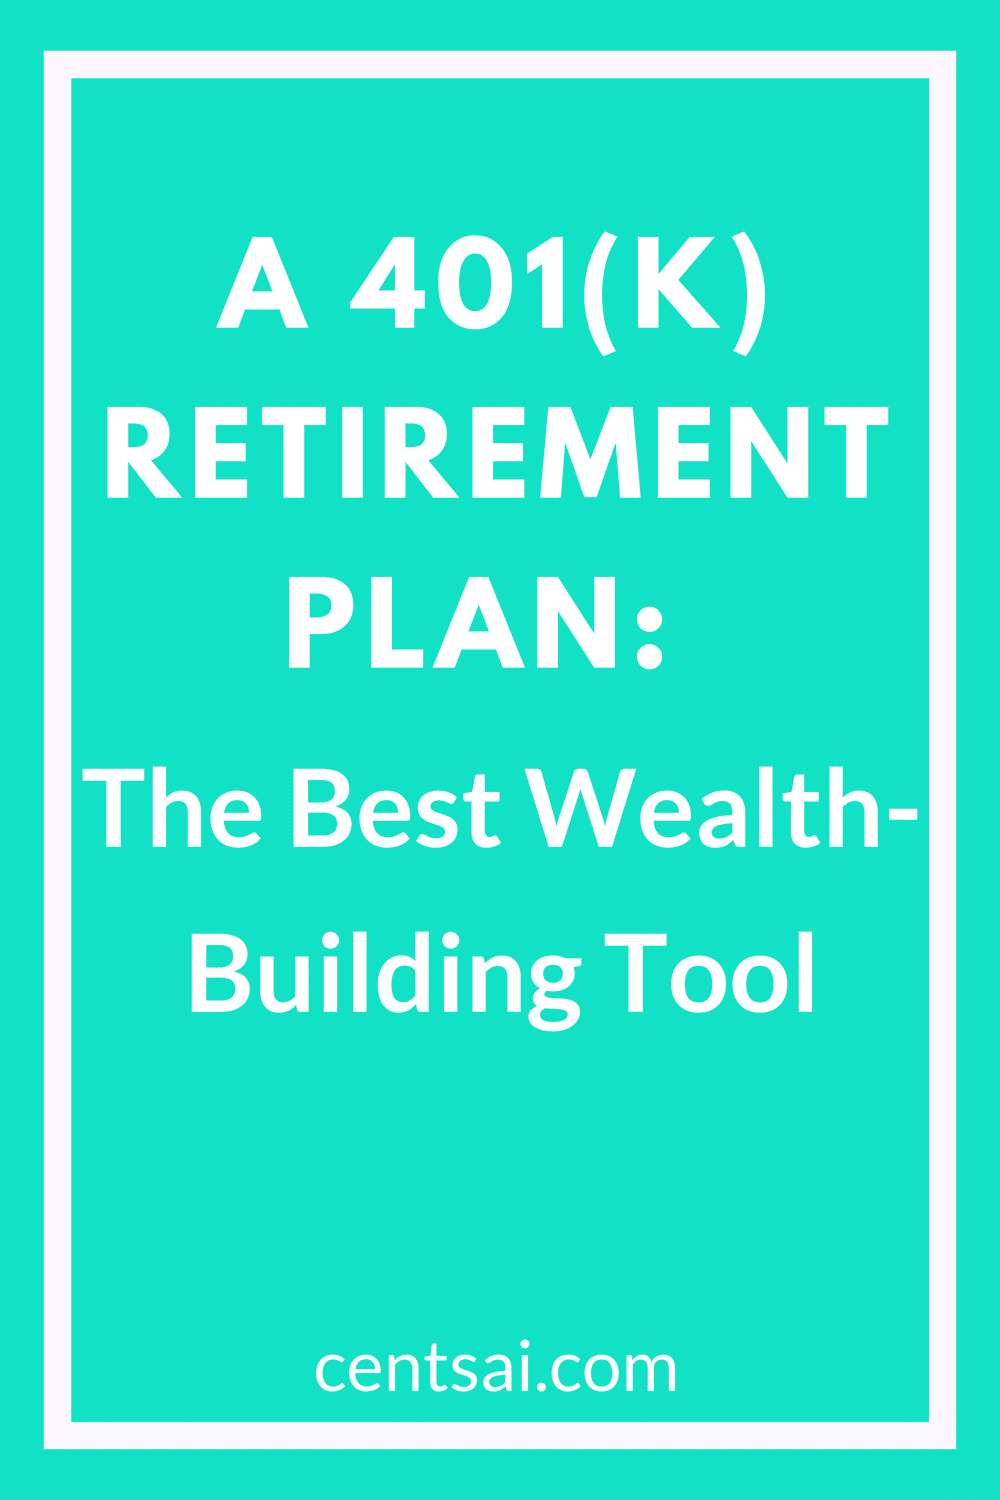 A 401(k) Retirement Plan: The Best Wealth-Building Tool. Do you have a 401(k) retirement plan? Do you make regular contributions to it? You should! There are some surprising benefits. #retirementplan #401k